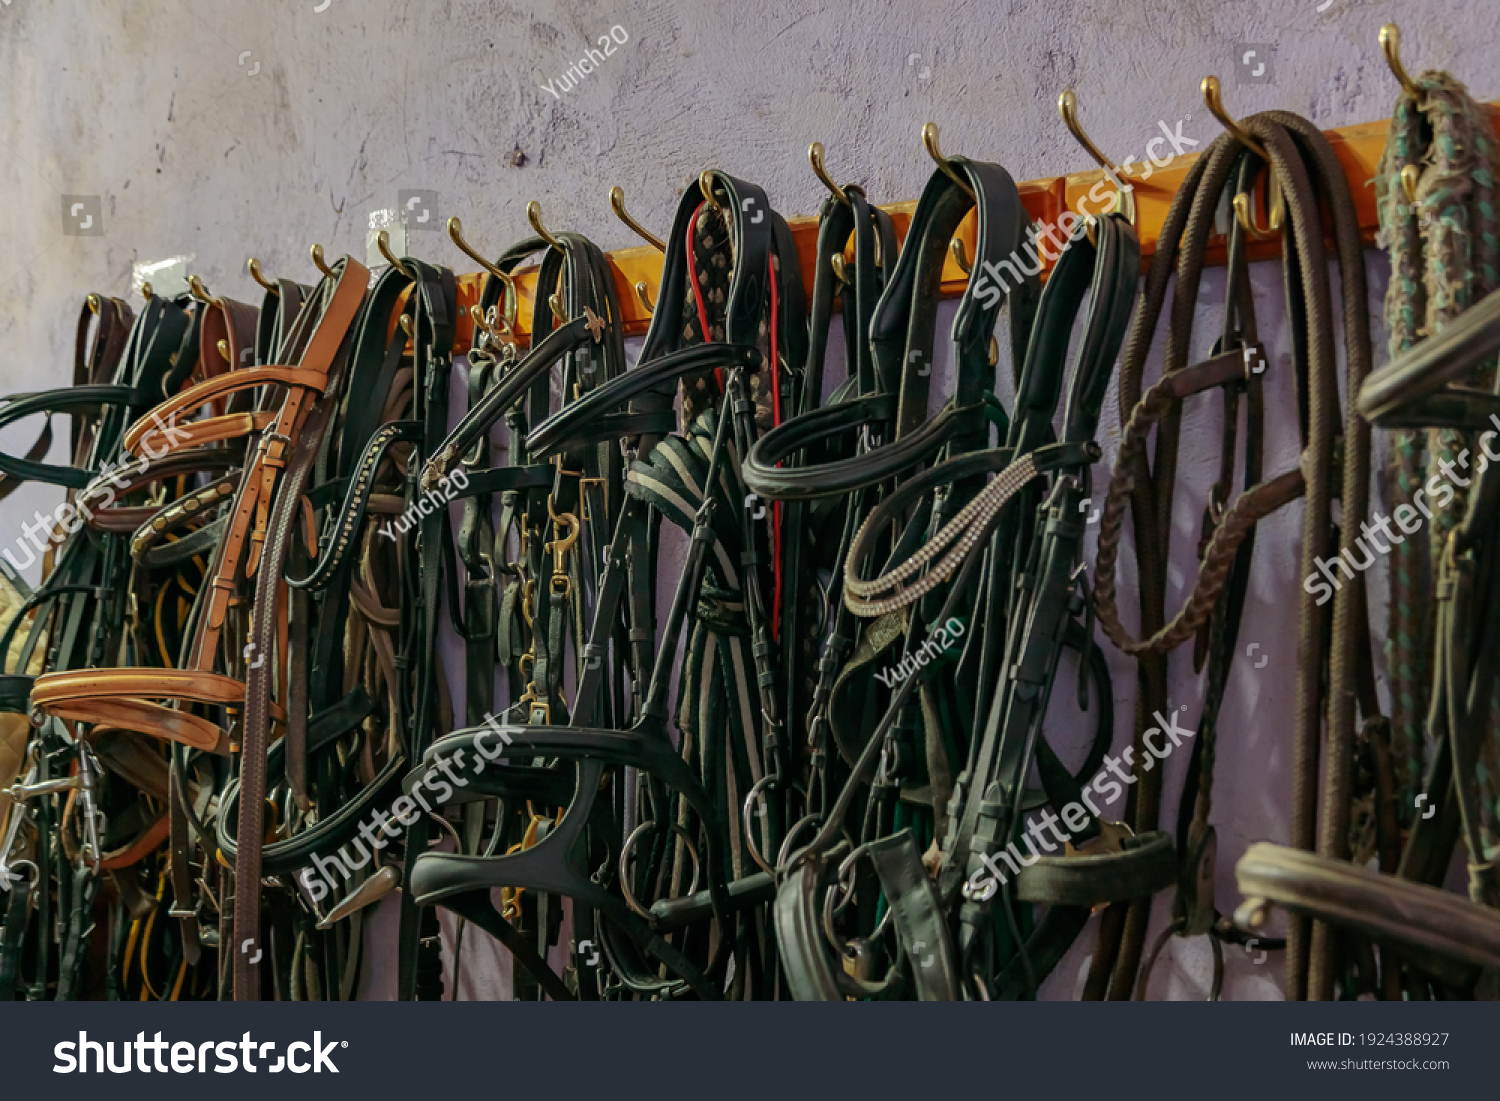 Kits of leather bridles and bats hang on the walls of the stable. #1924388927